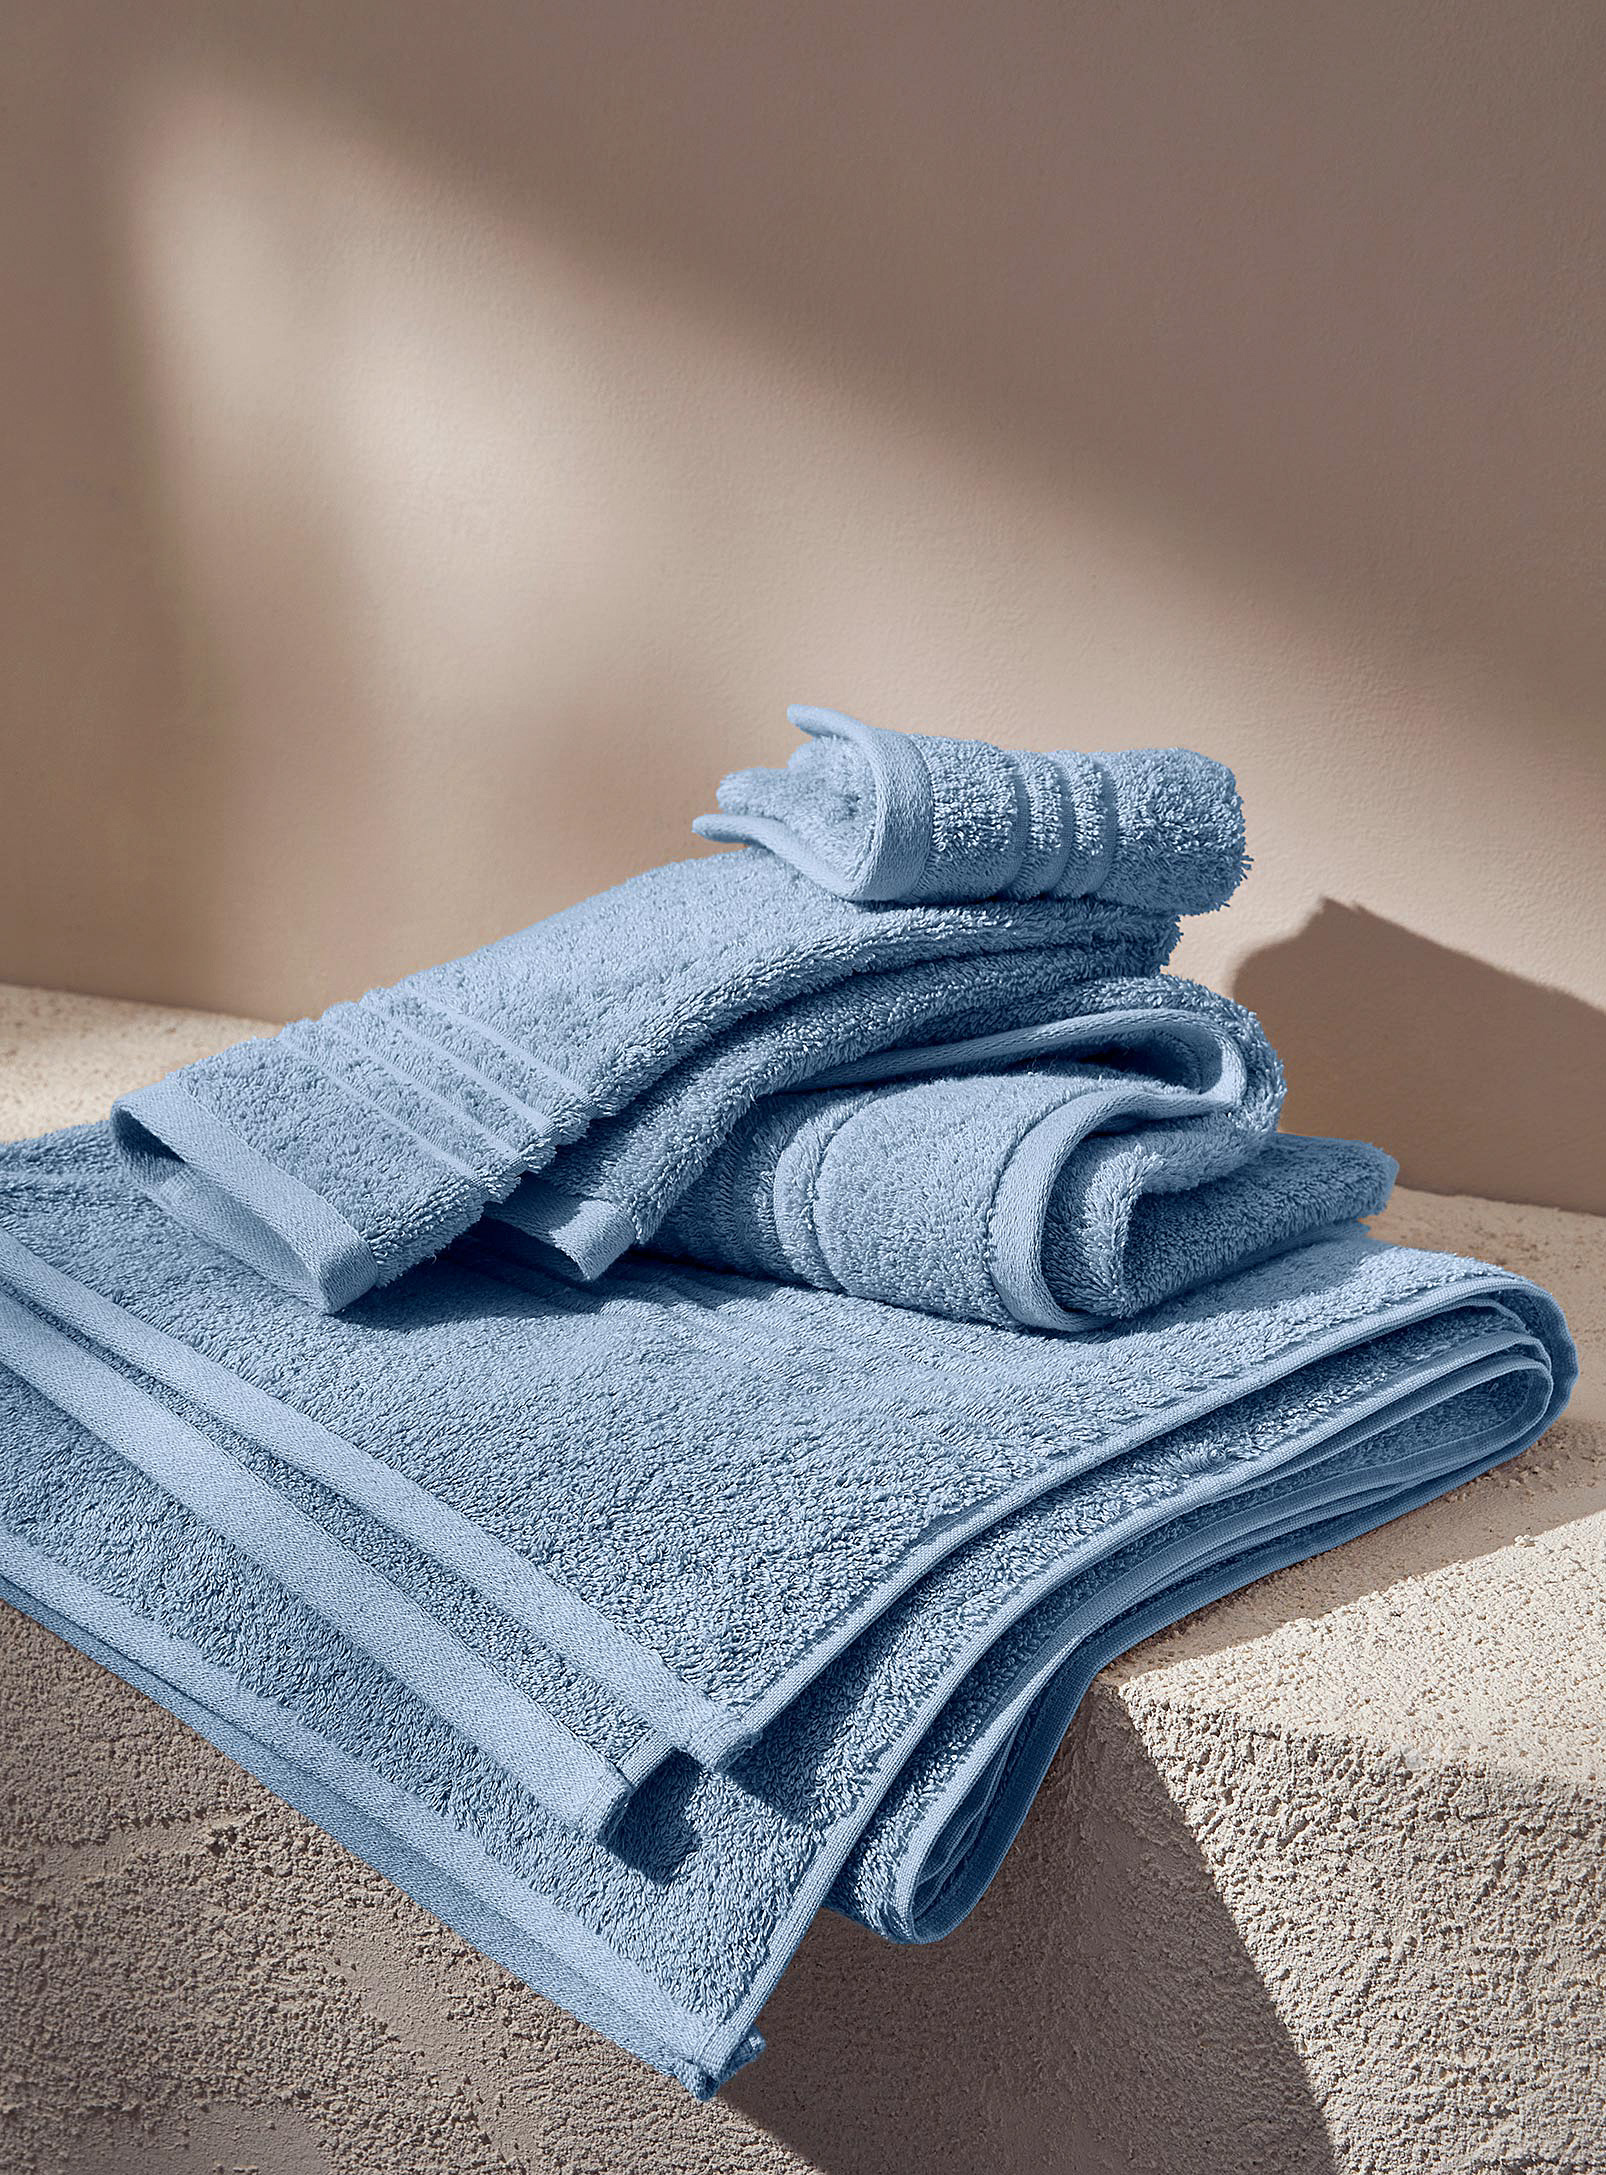 Simons Maison - Egyptian cotton towels Soft and absorbent